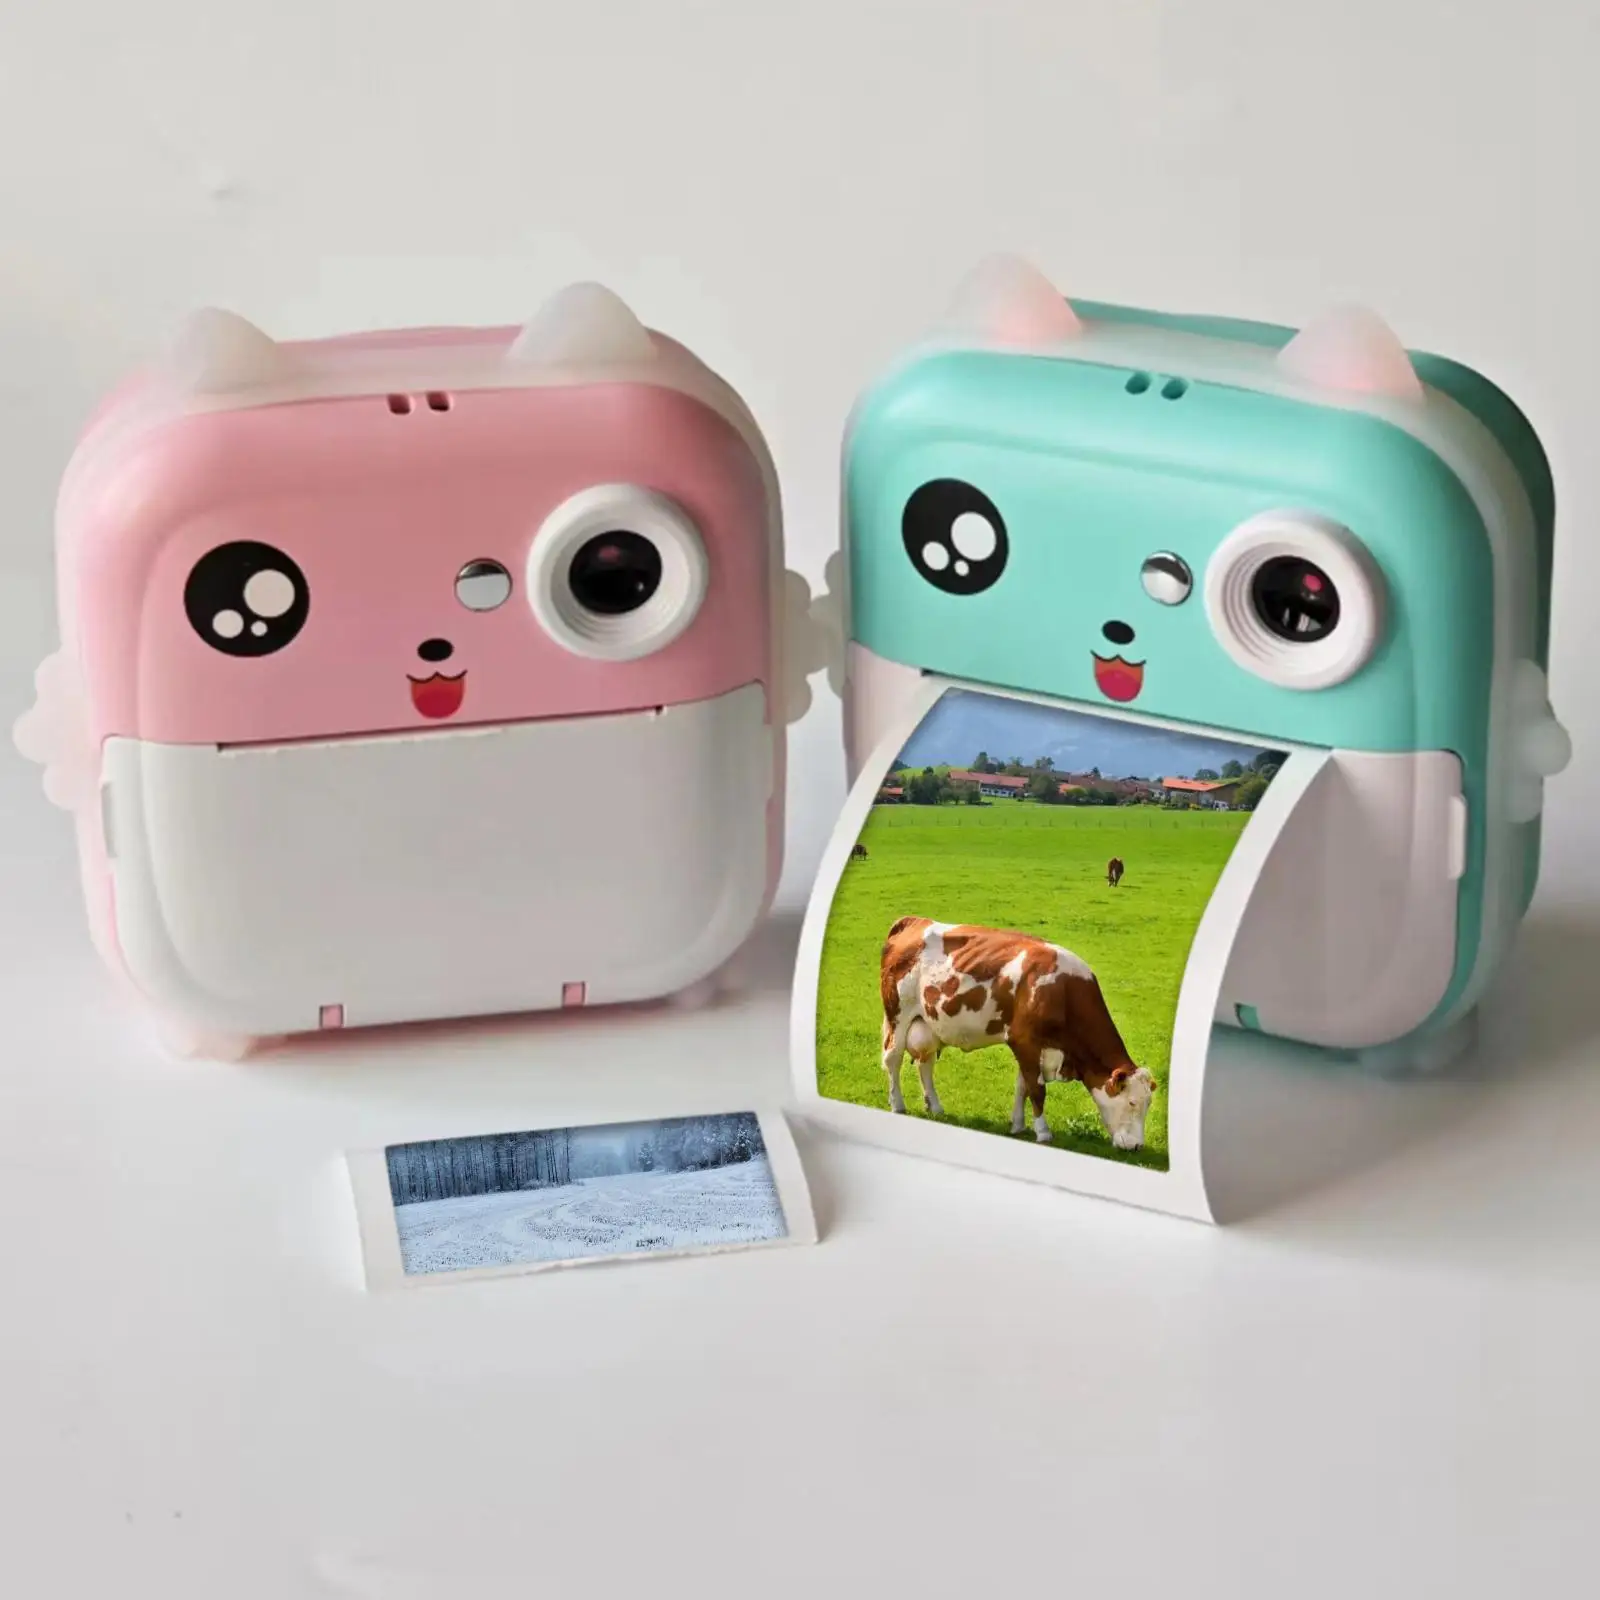 Instant Print Digital Kids Camera 2.4 Screen Toy Camera Photo and Video Recording Kids Digital Camera for 5-8 Year Old Girls